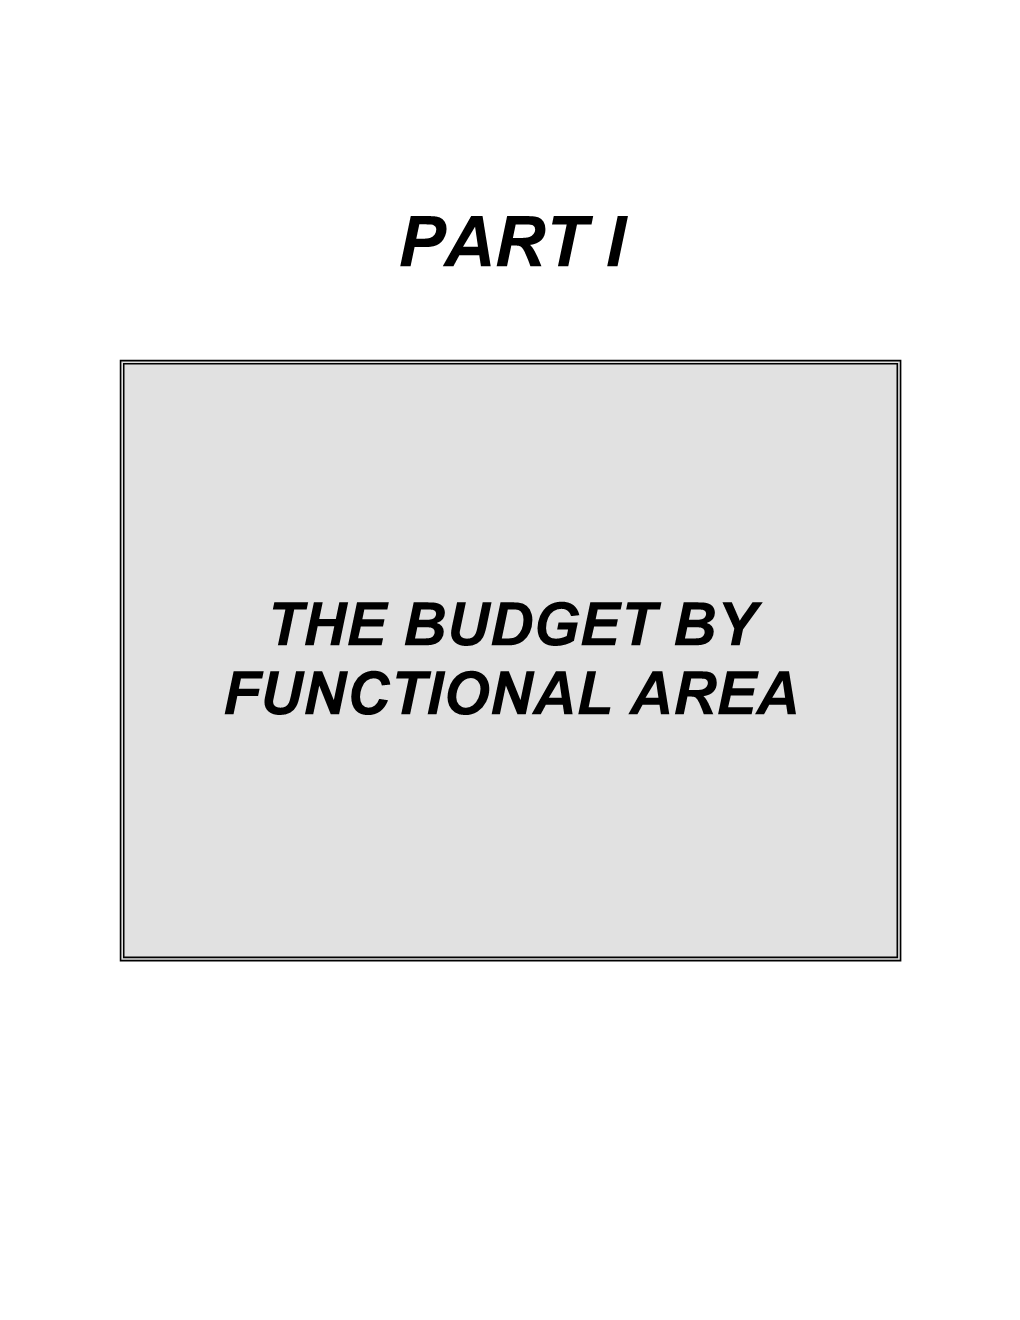 PART I — the Budget by Functional Area